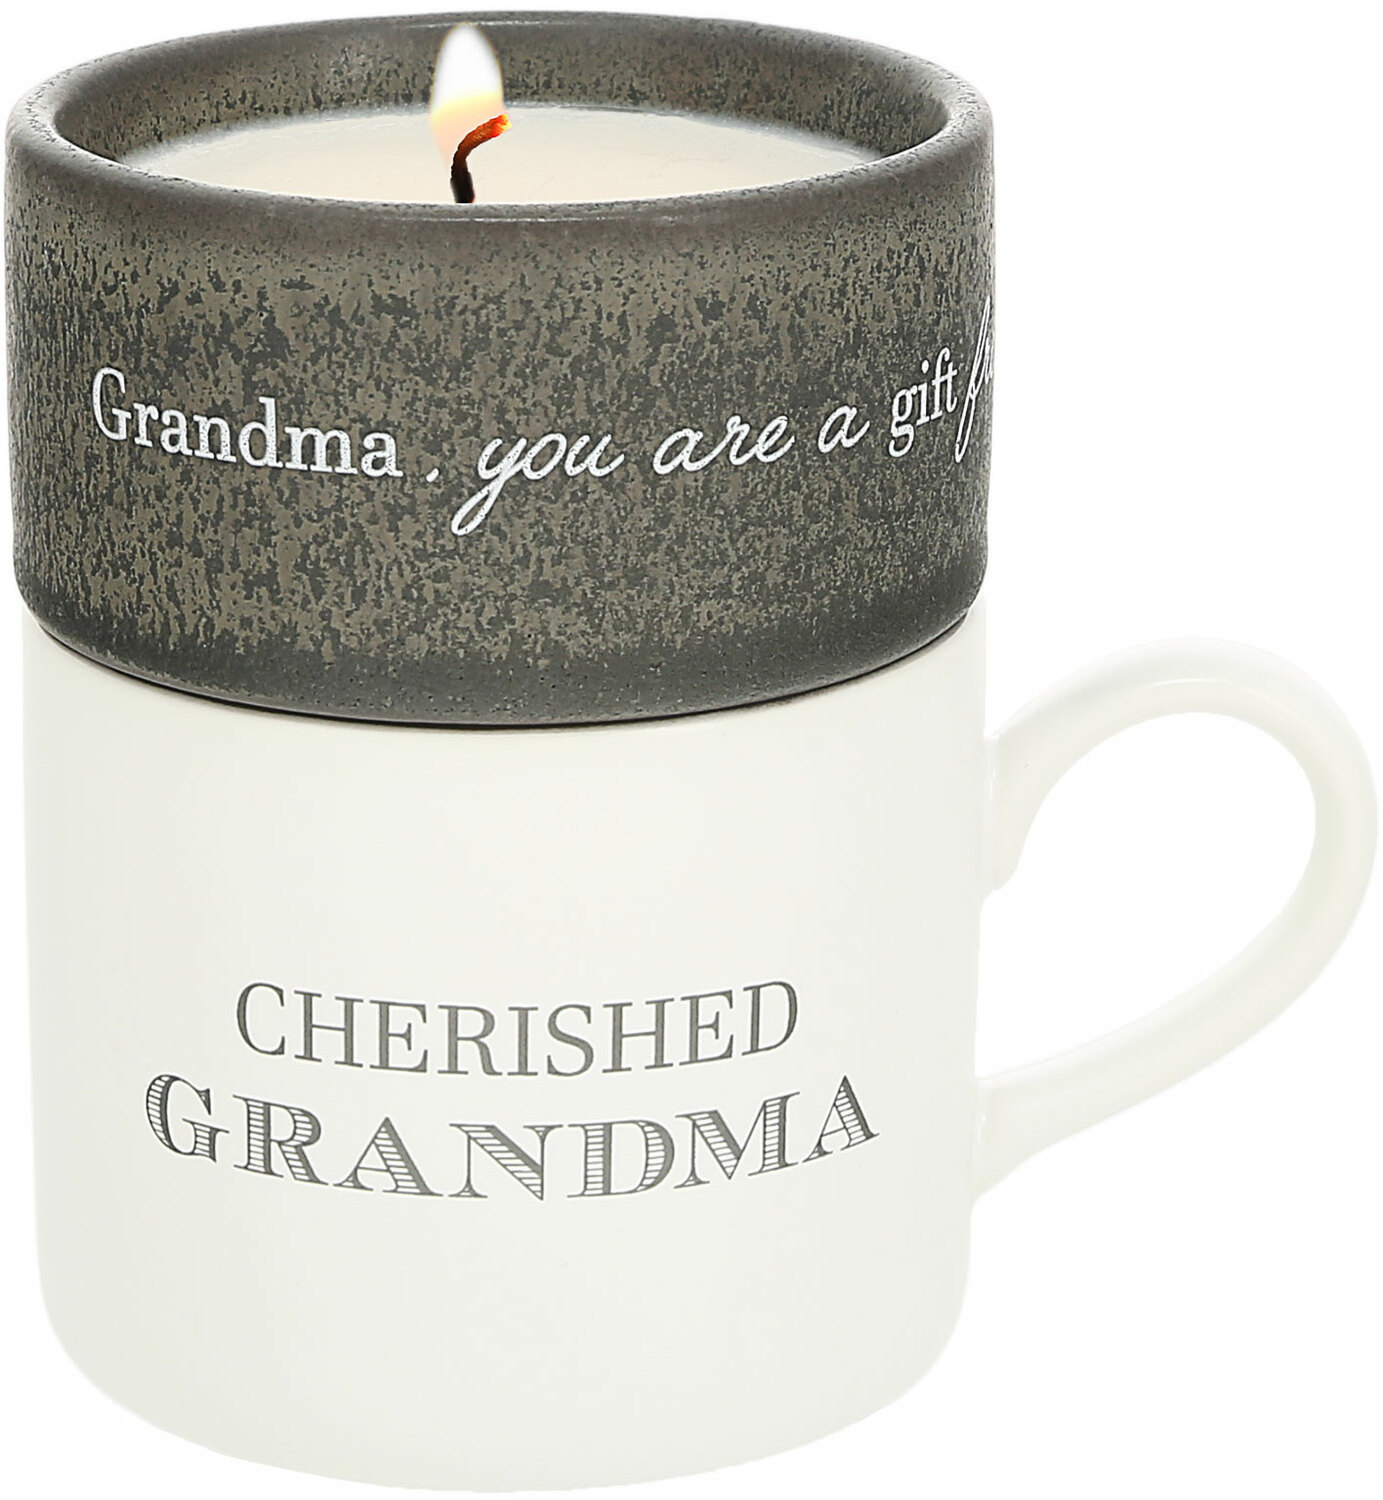 Grandma by Filled with Warmth - Grandma - Stacking Mug and Candle Set
100% Soy Wax Scent: Tranquility